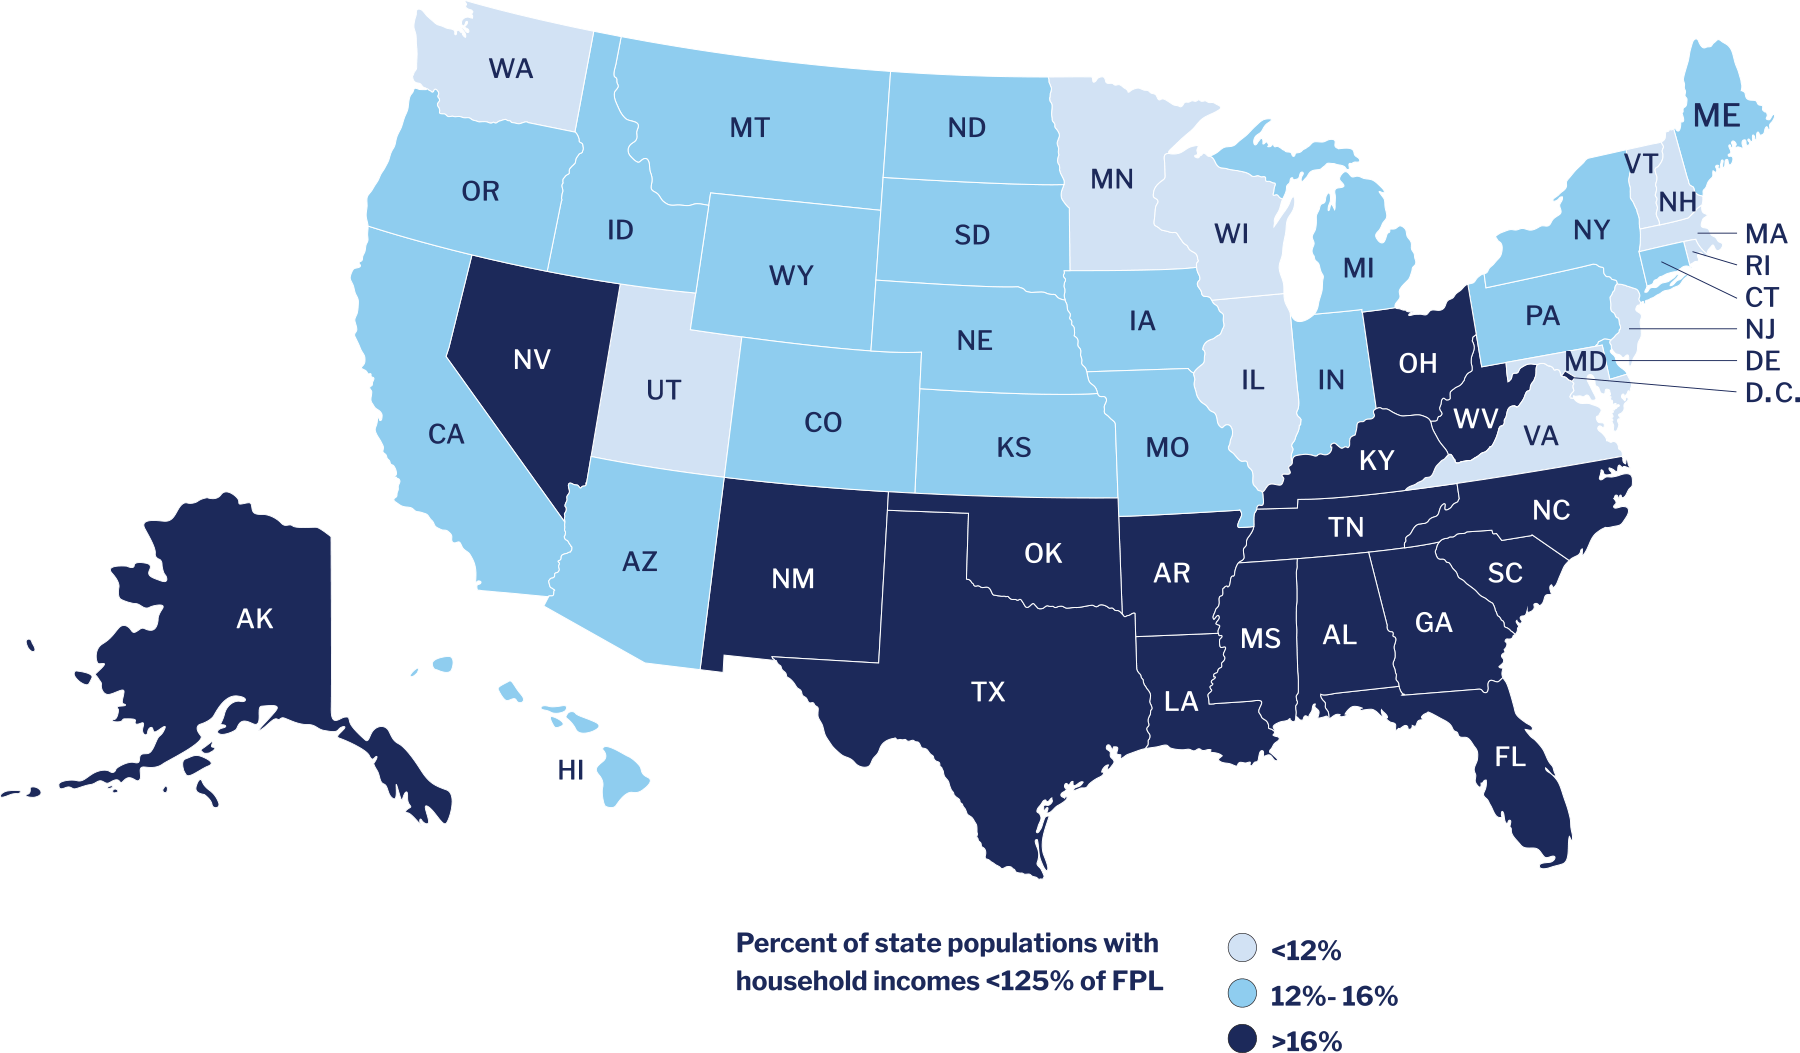 Map of United States in various shades of blue